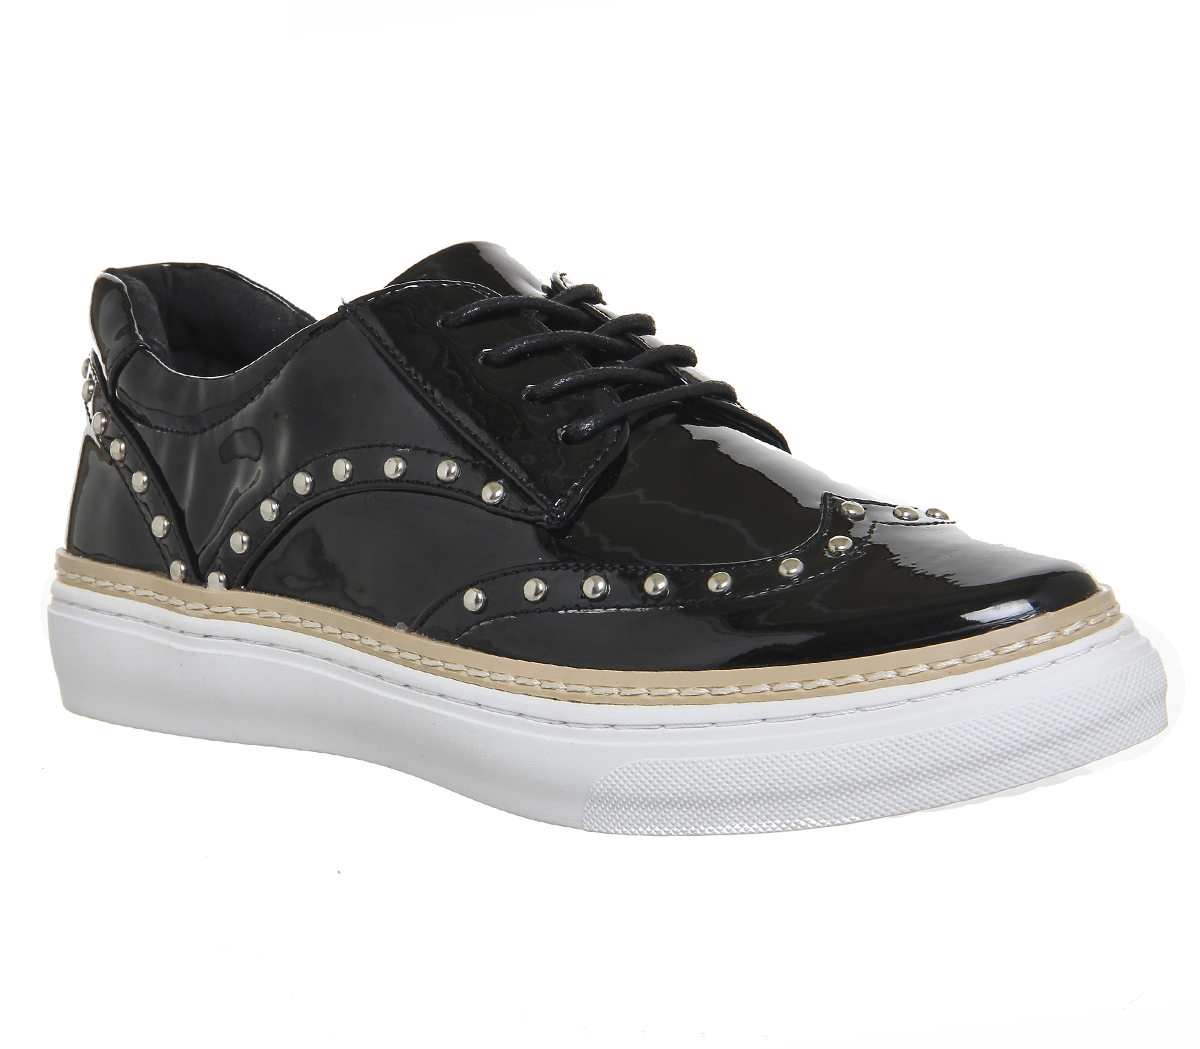 OFFICE Proud Studded Lace Up Trainers Black Patent - Flat Shoes for Women